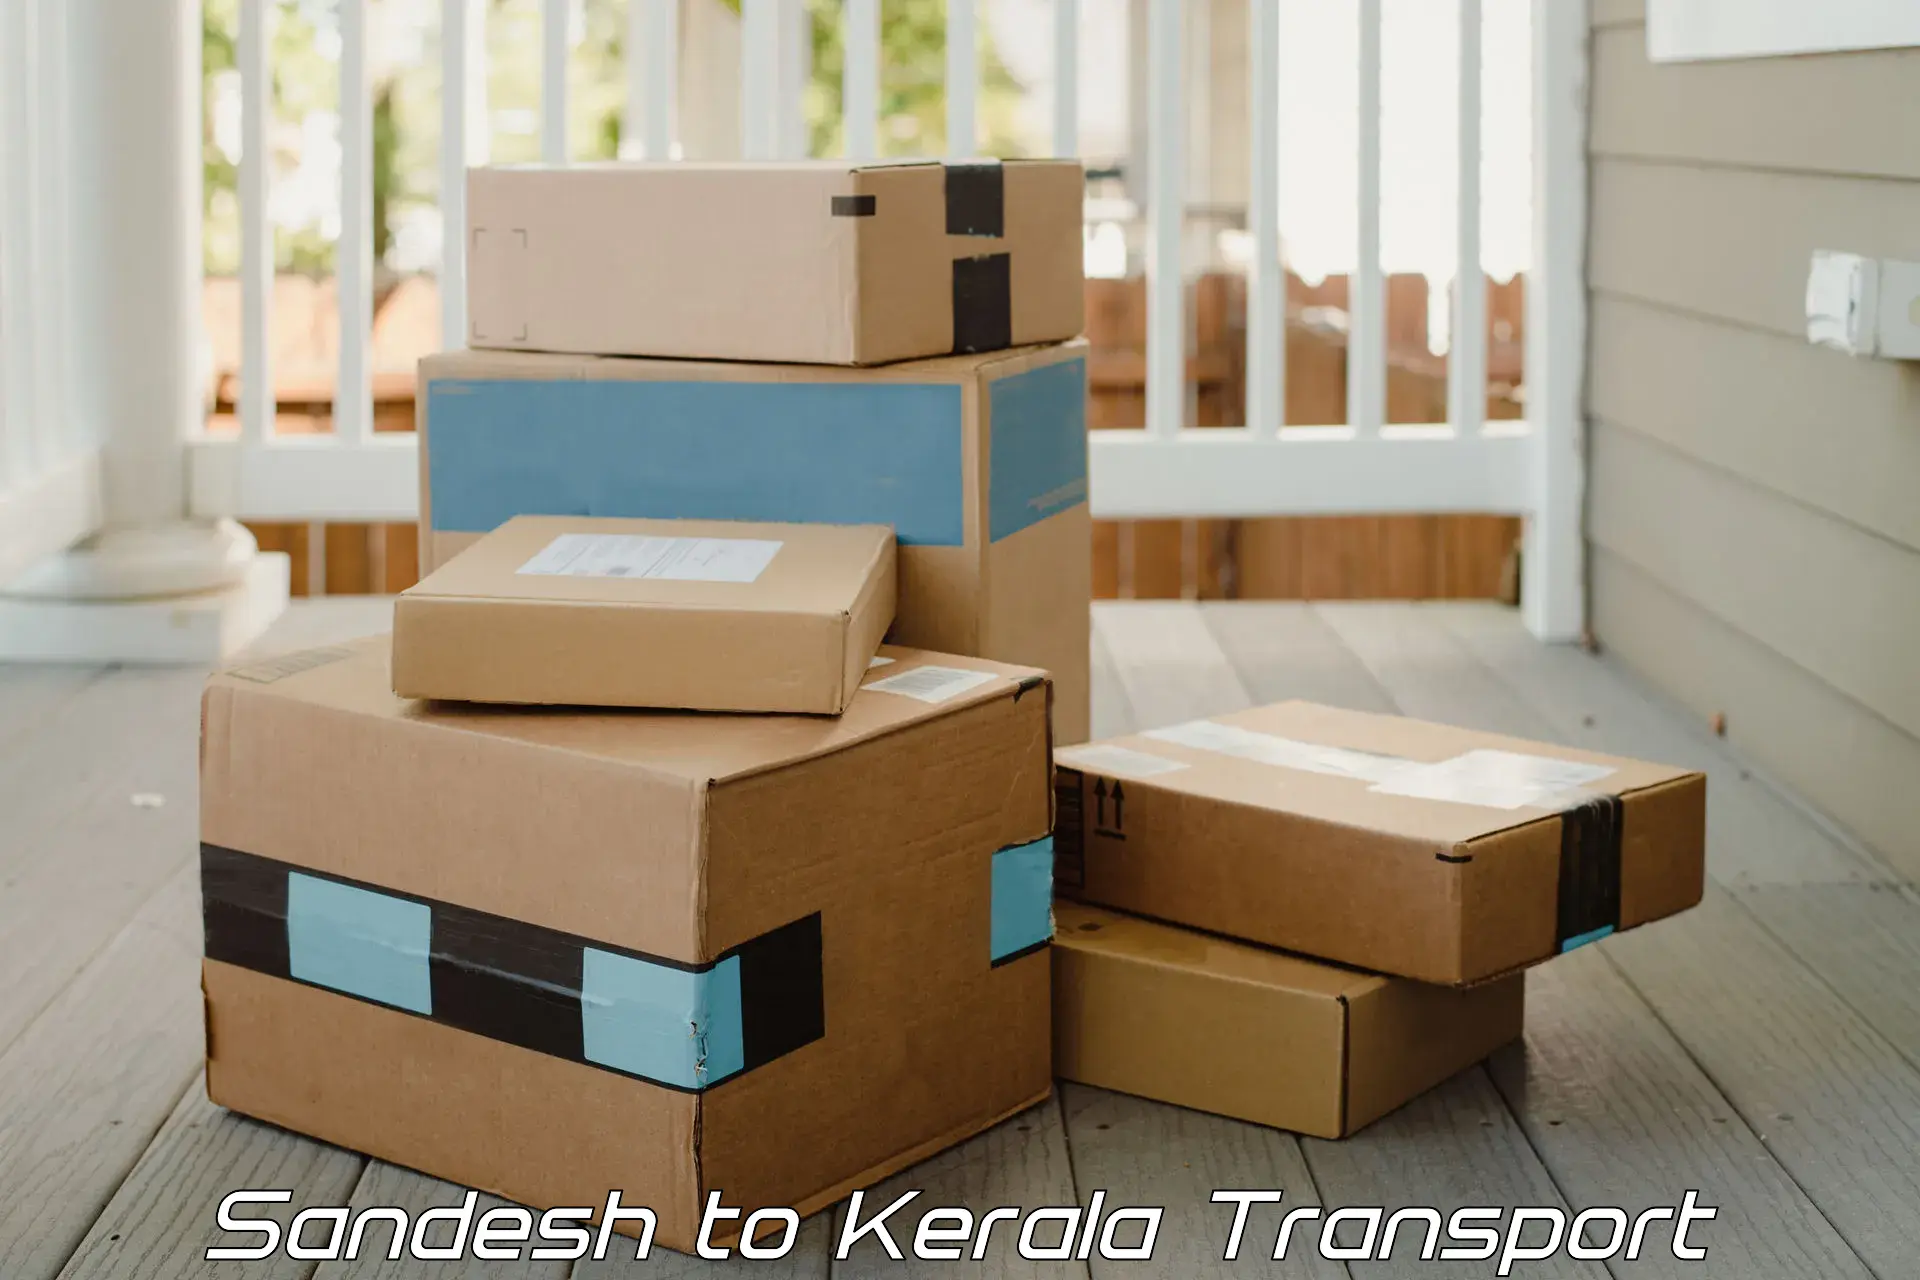 Truck transport companies in India Sandesh to Kozhikode